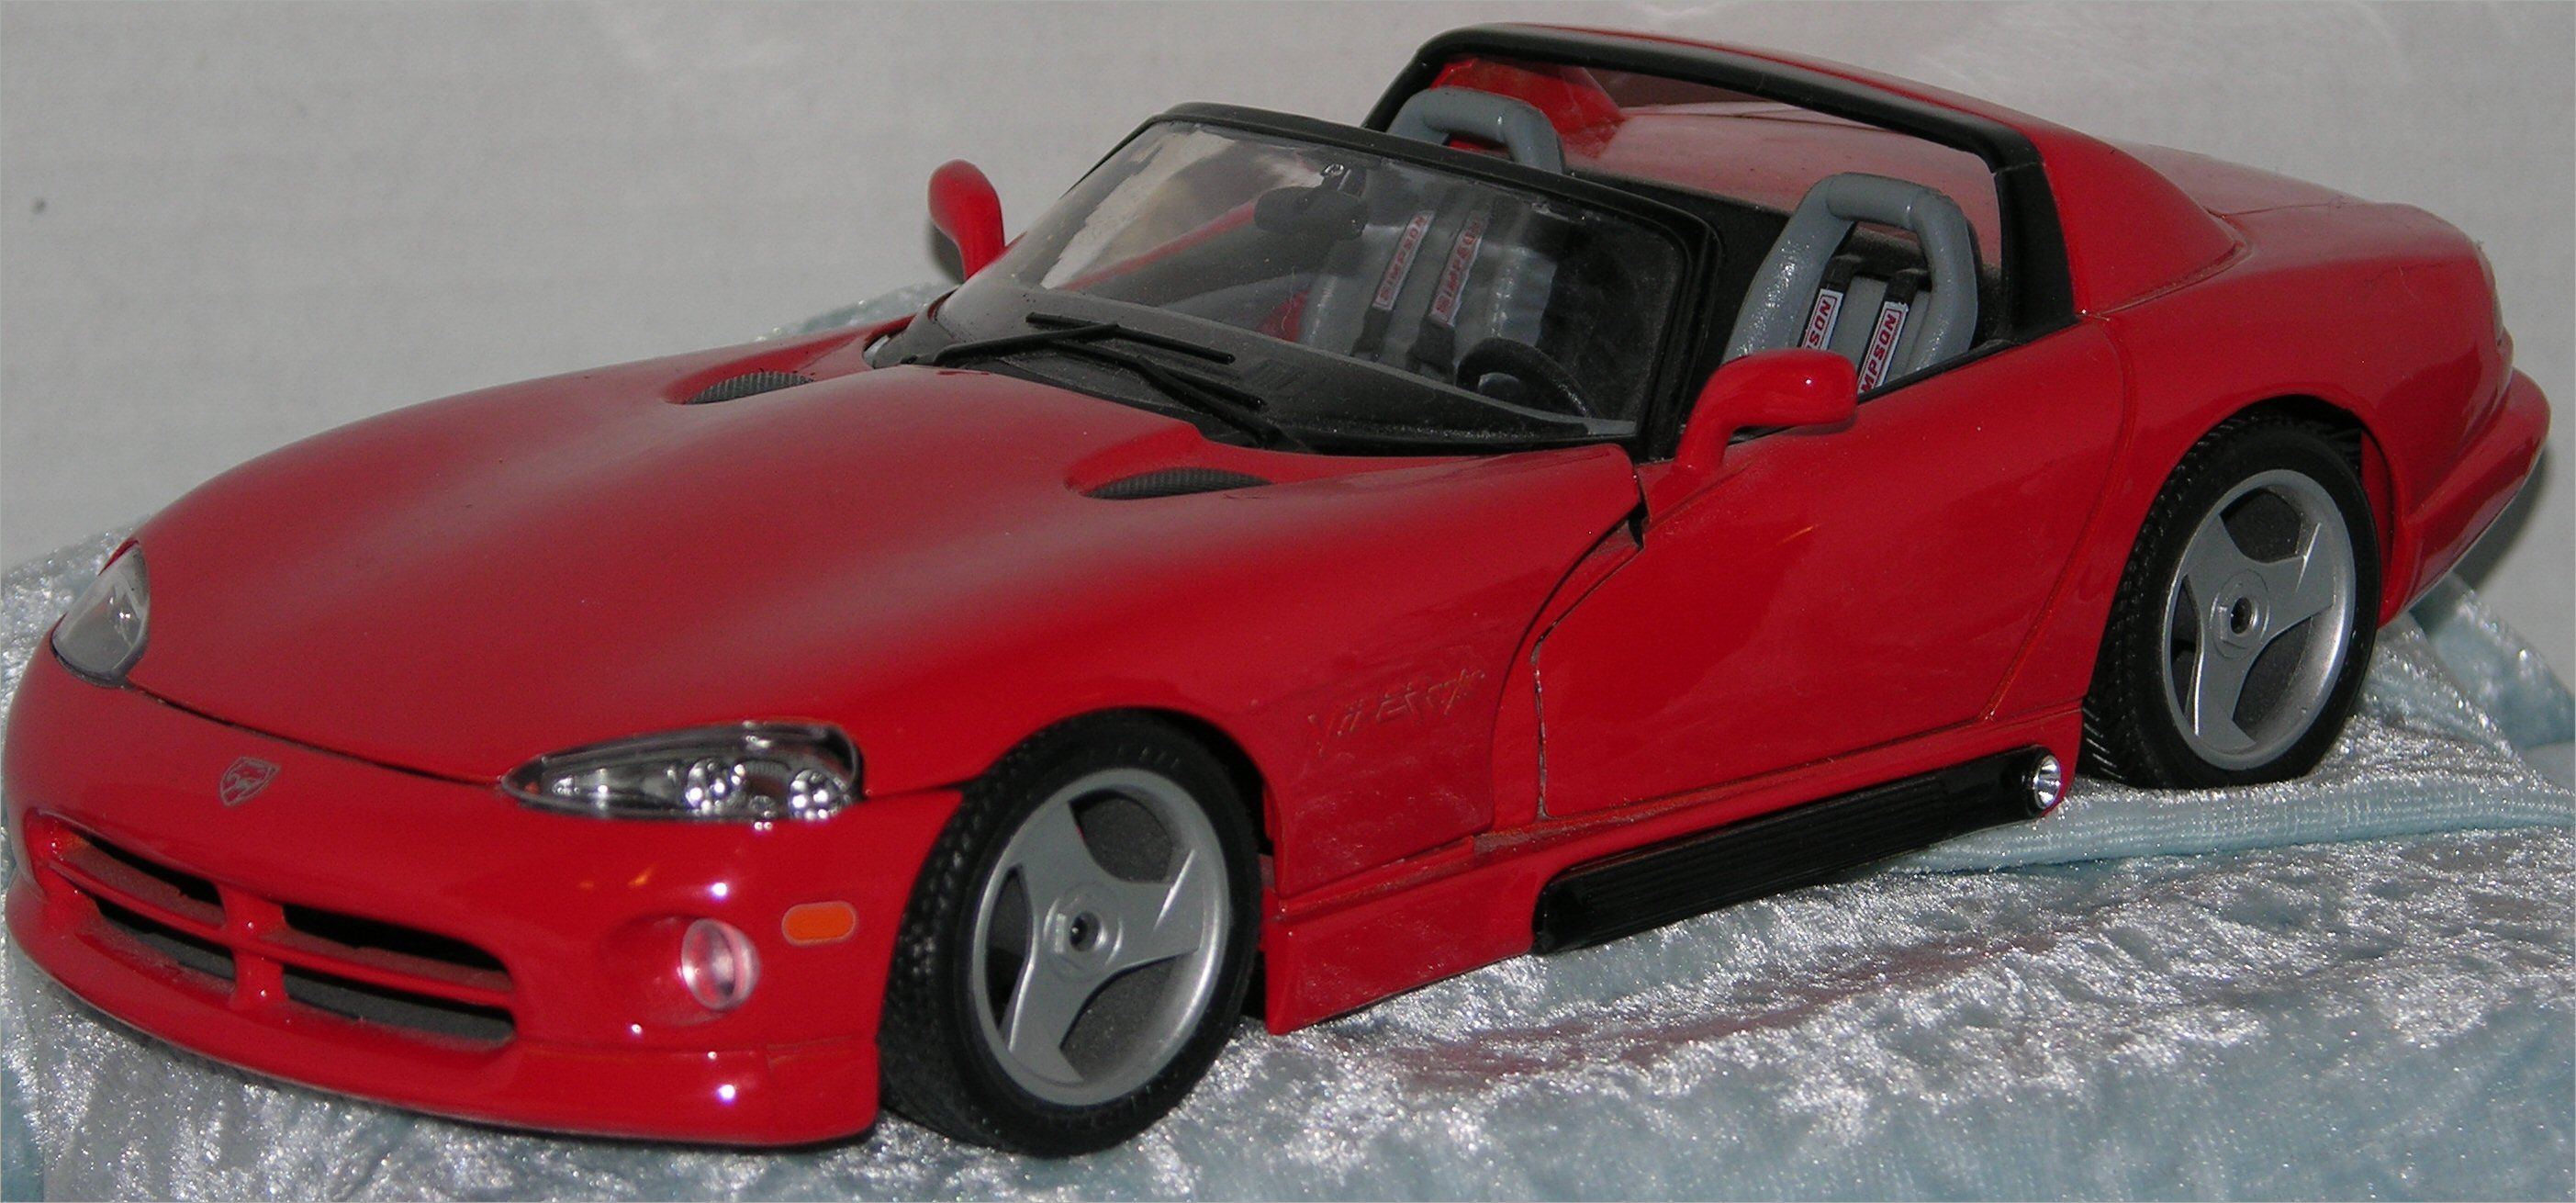 18 scale dodge viper by durango diecast made in italy 9